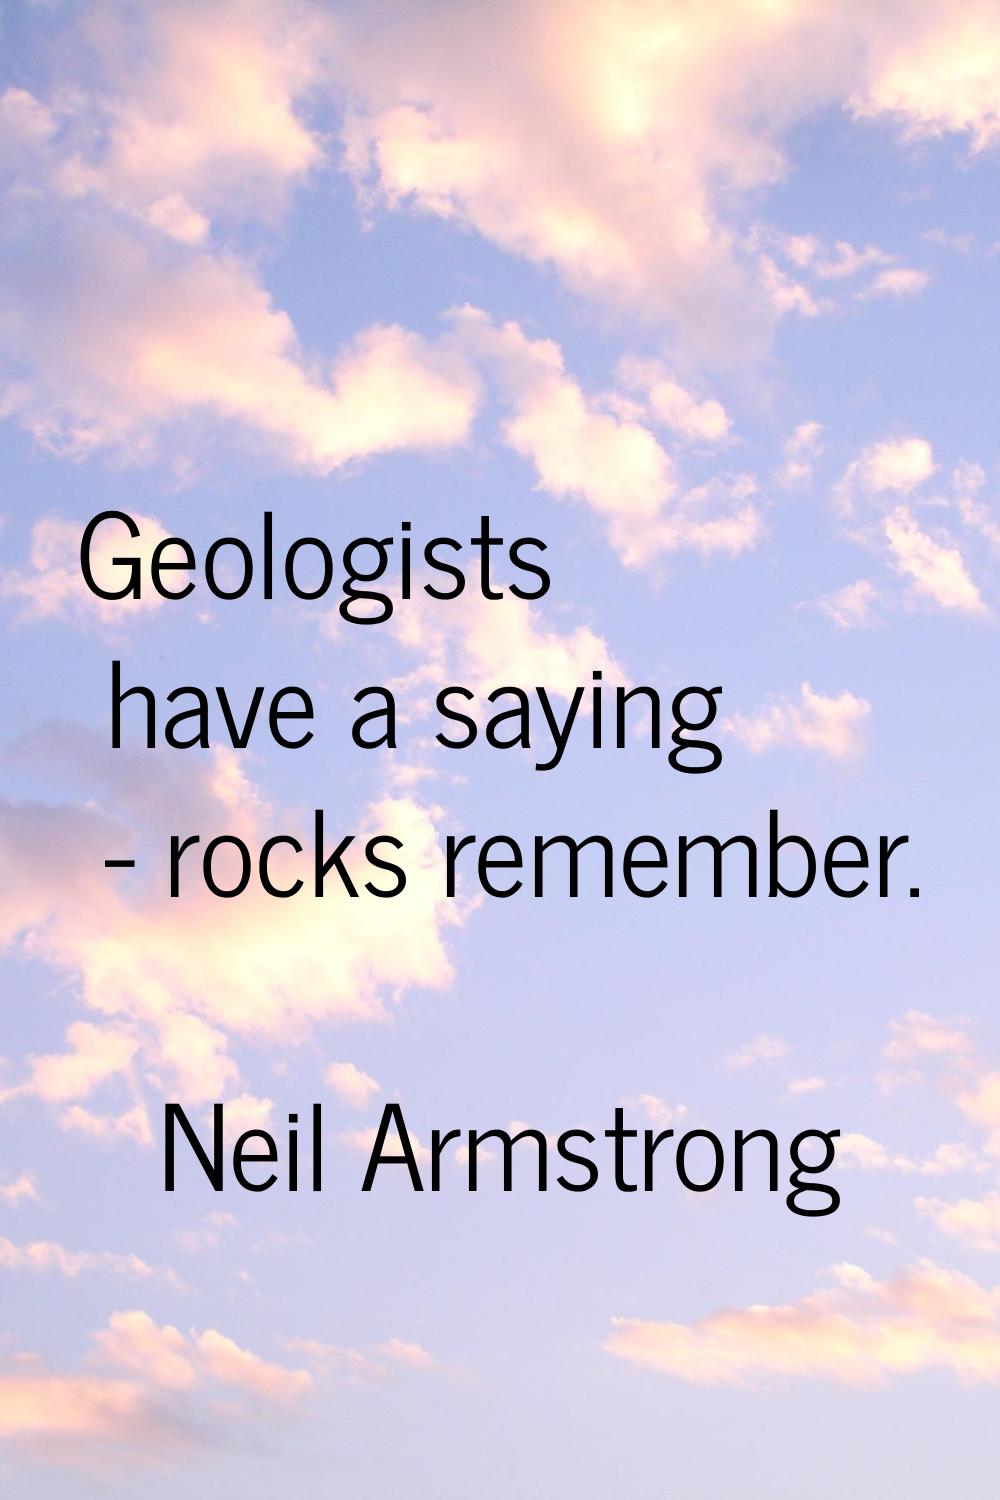 Geologists have a saying - rocks remember.